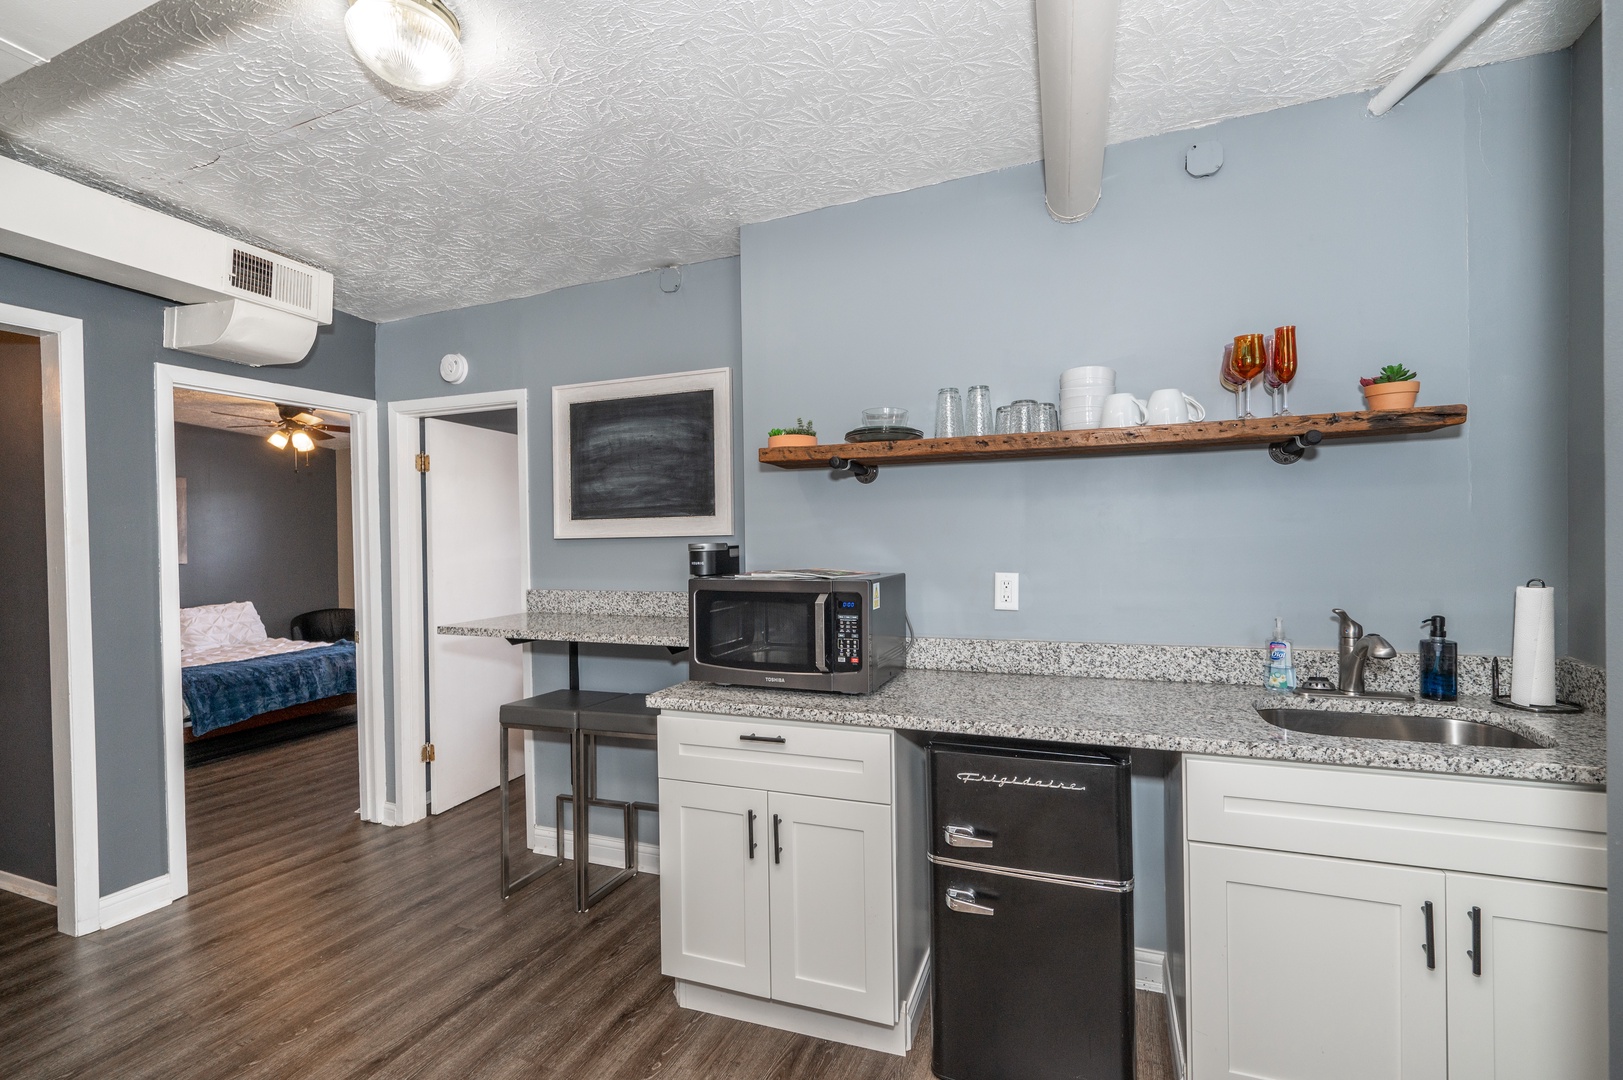 The streamlined kitchenette is well-equipped for your visit